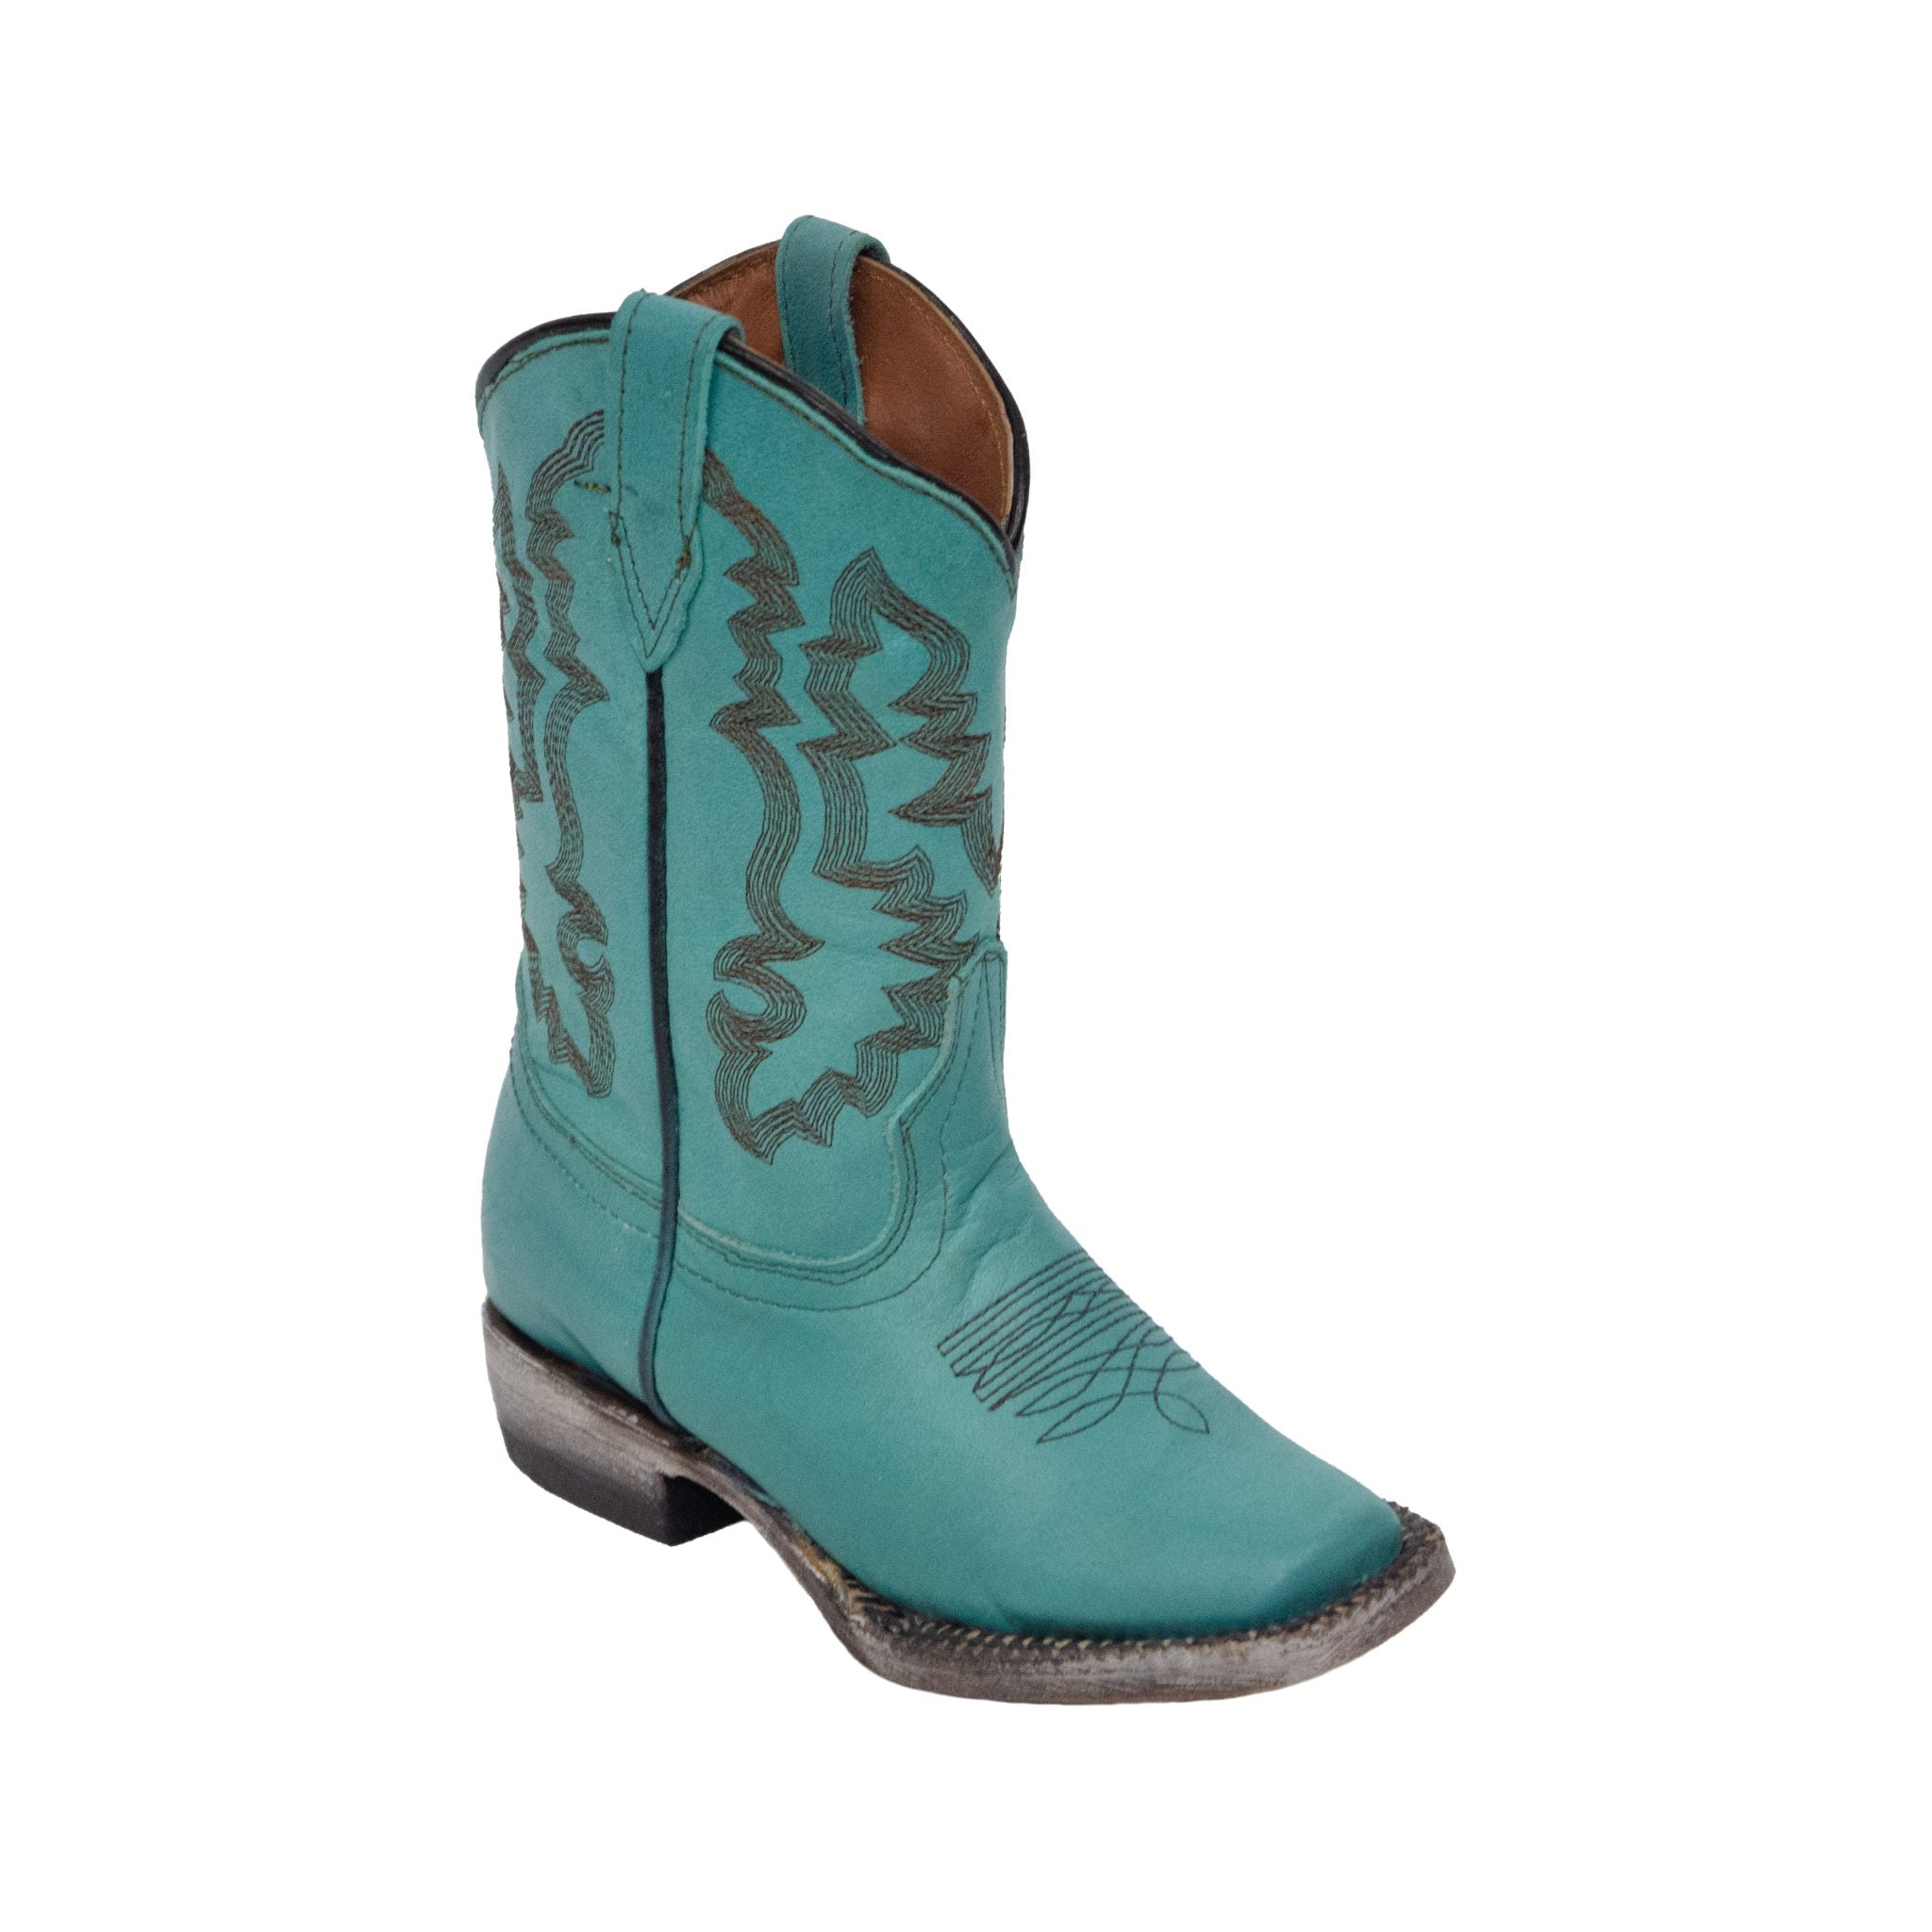 Addy Turquoise Calf